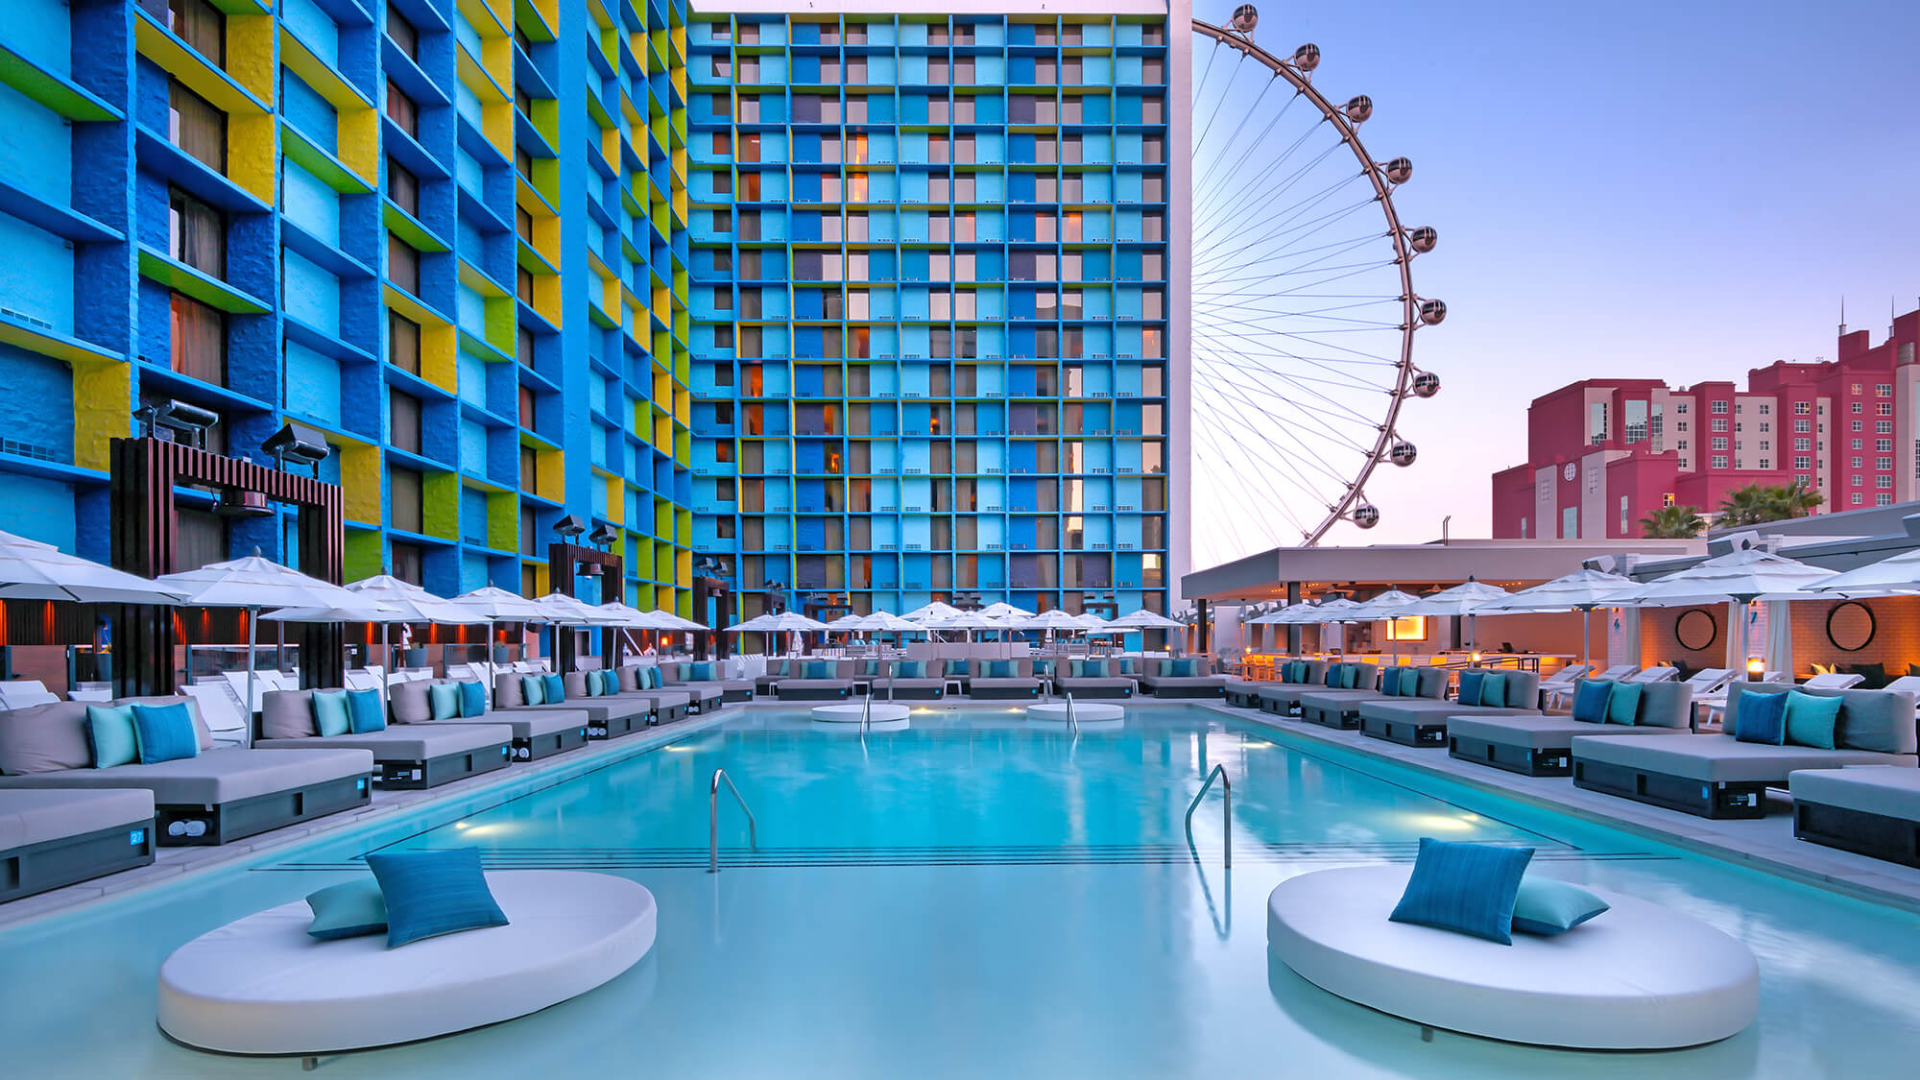 Teachers, school staff, professors, and college students enjoy discounted stays at The LINQ Las Vegas.